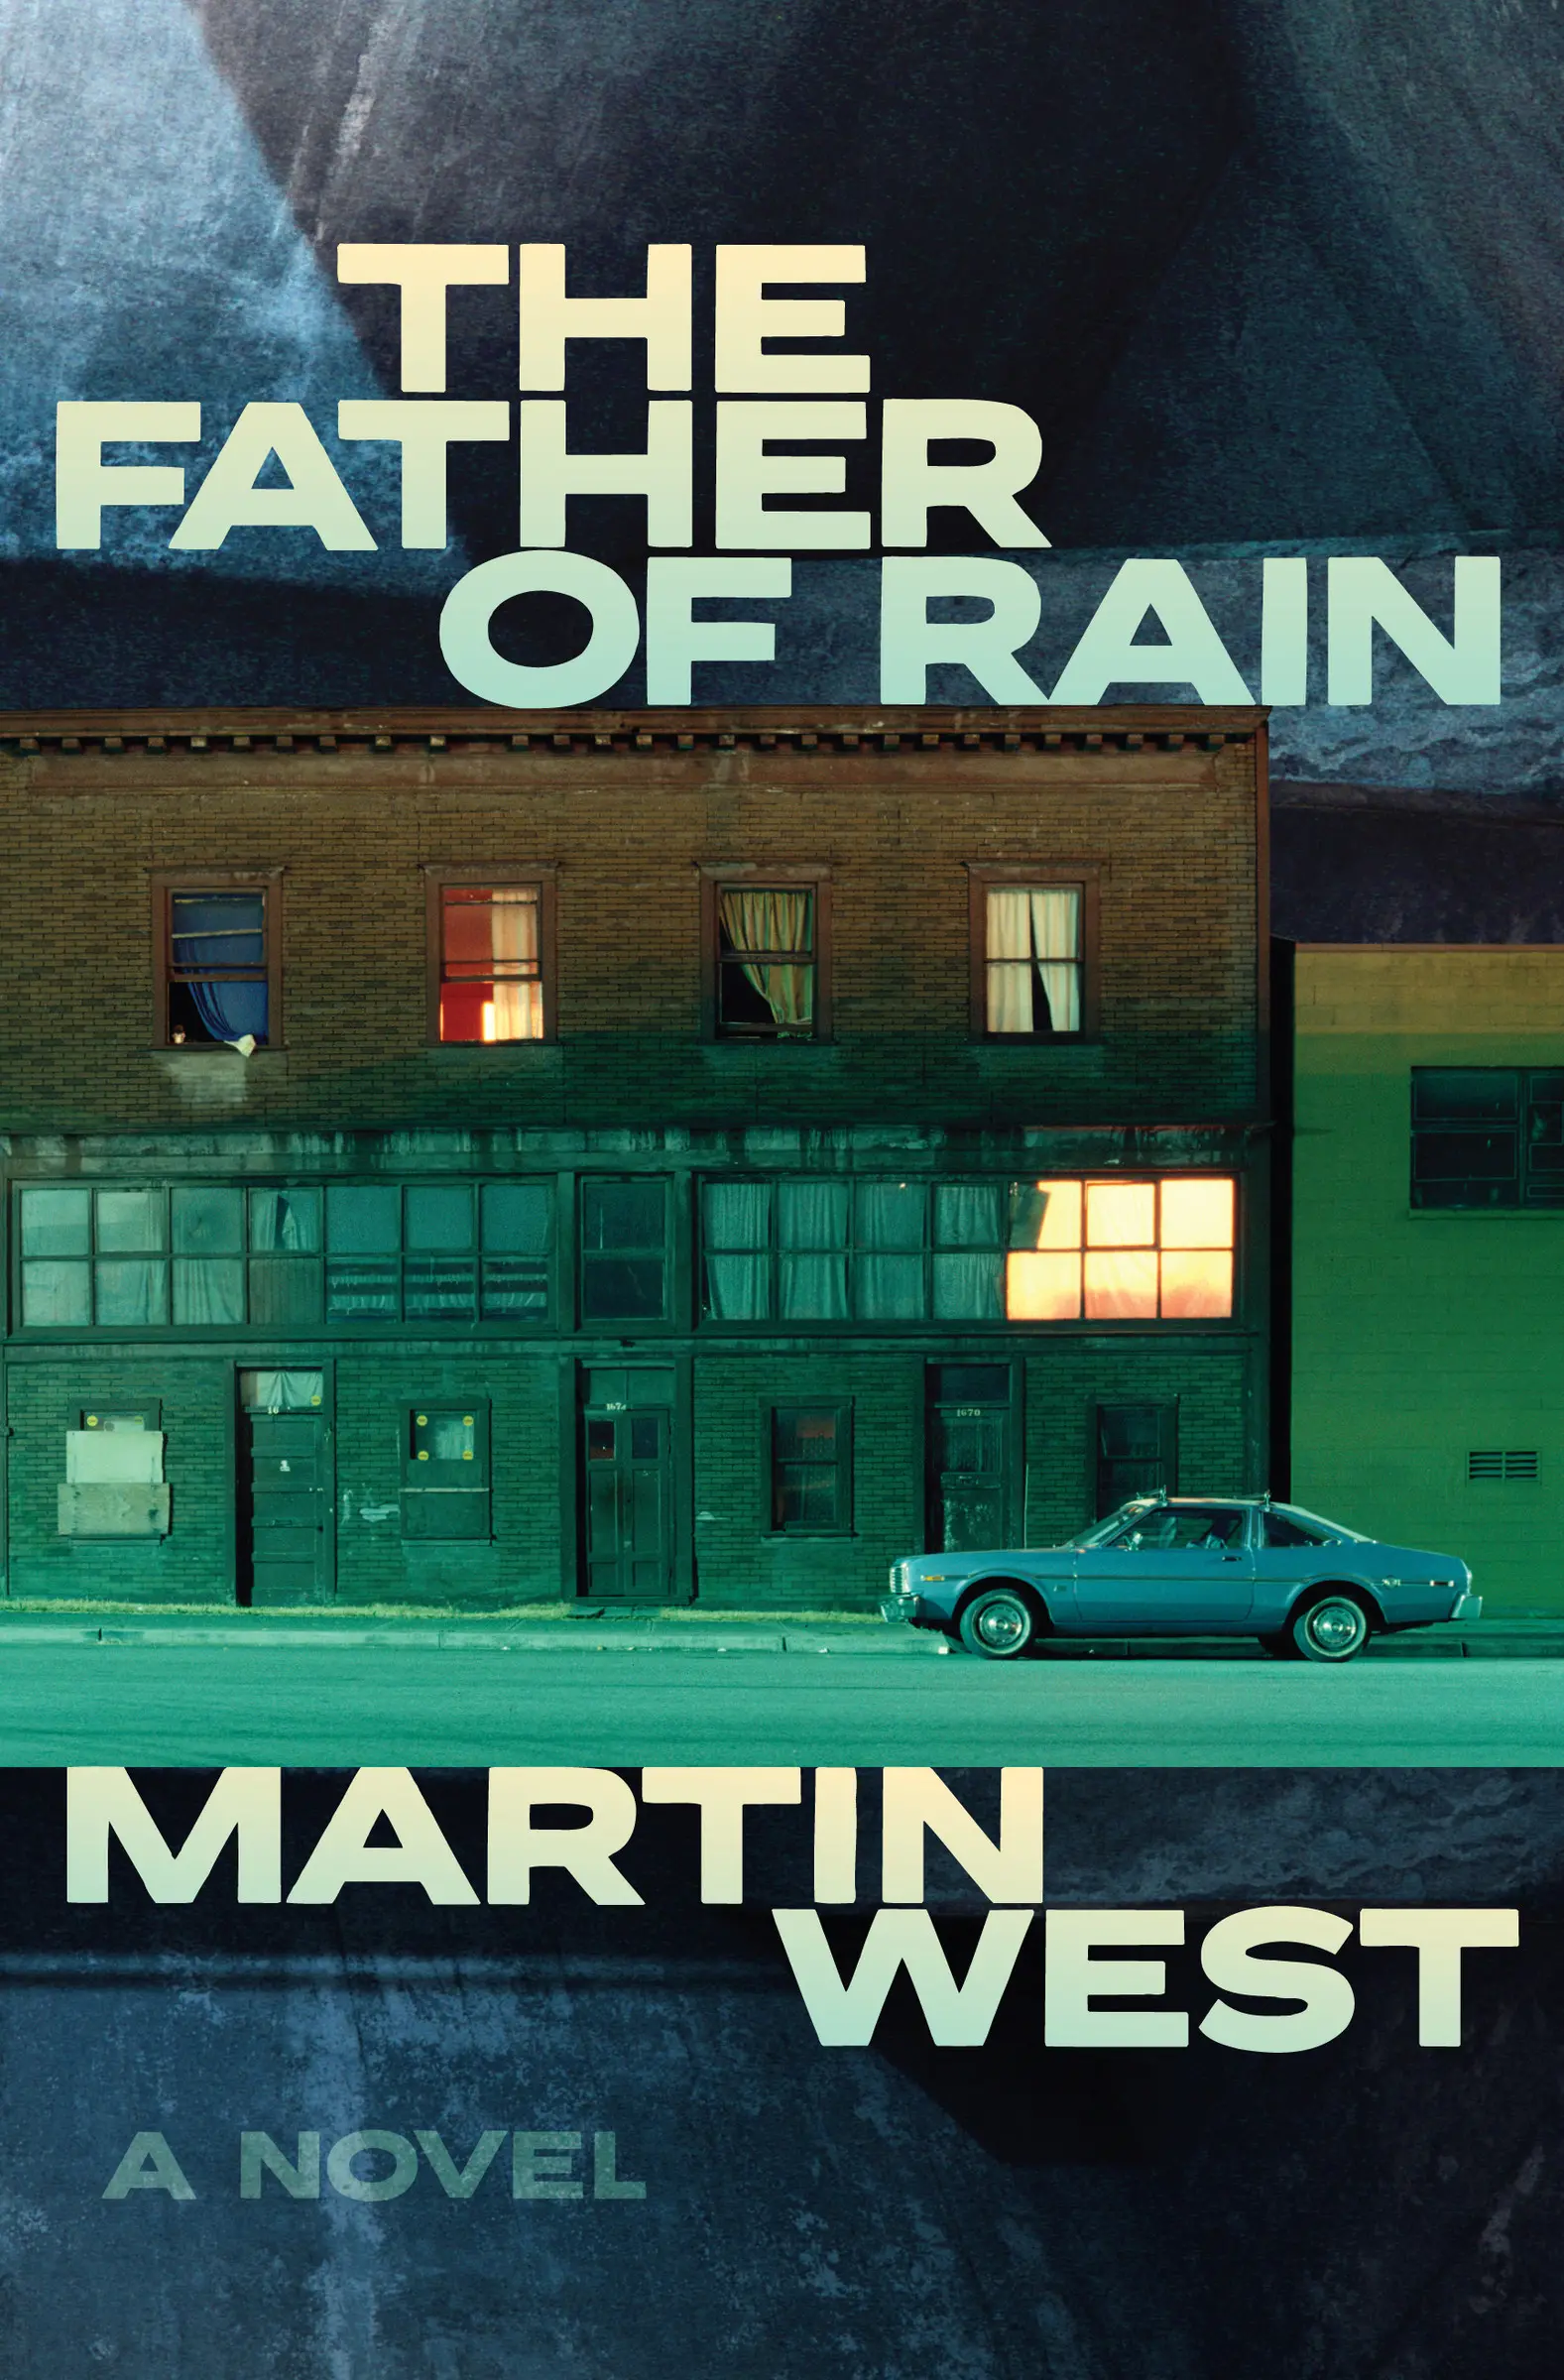 The cover of The Father of Rain by Martin West.